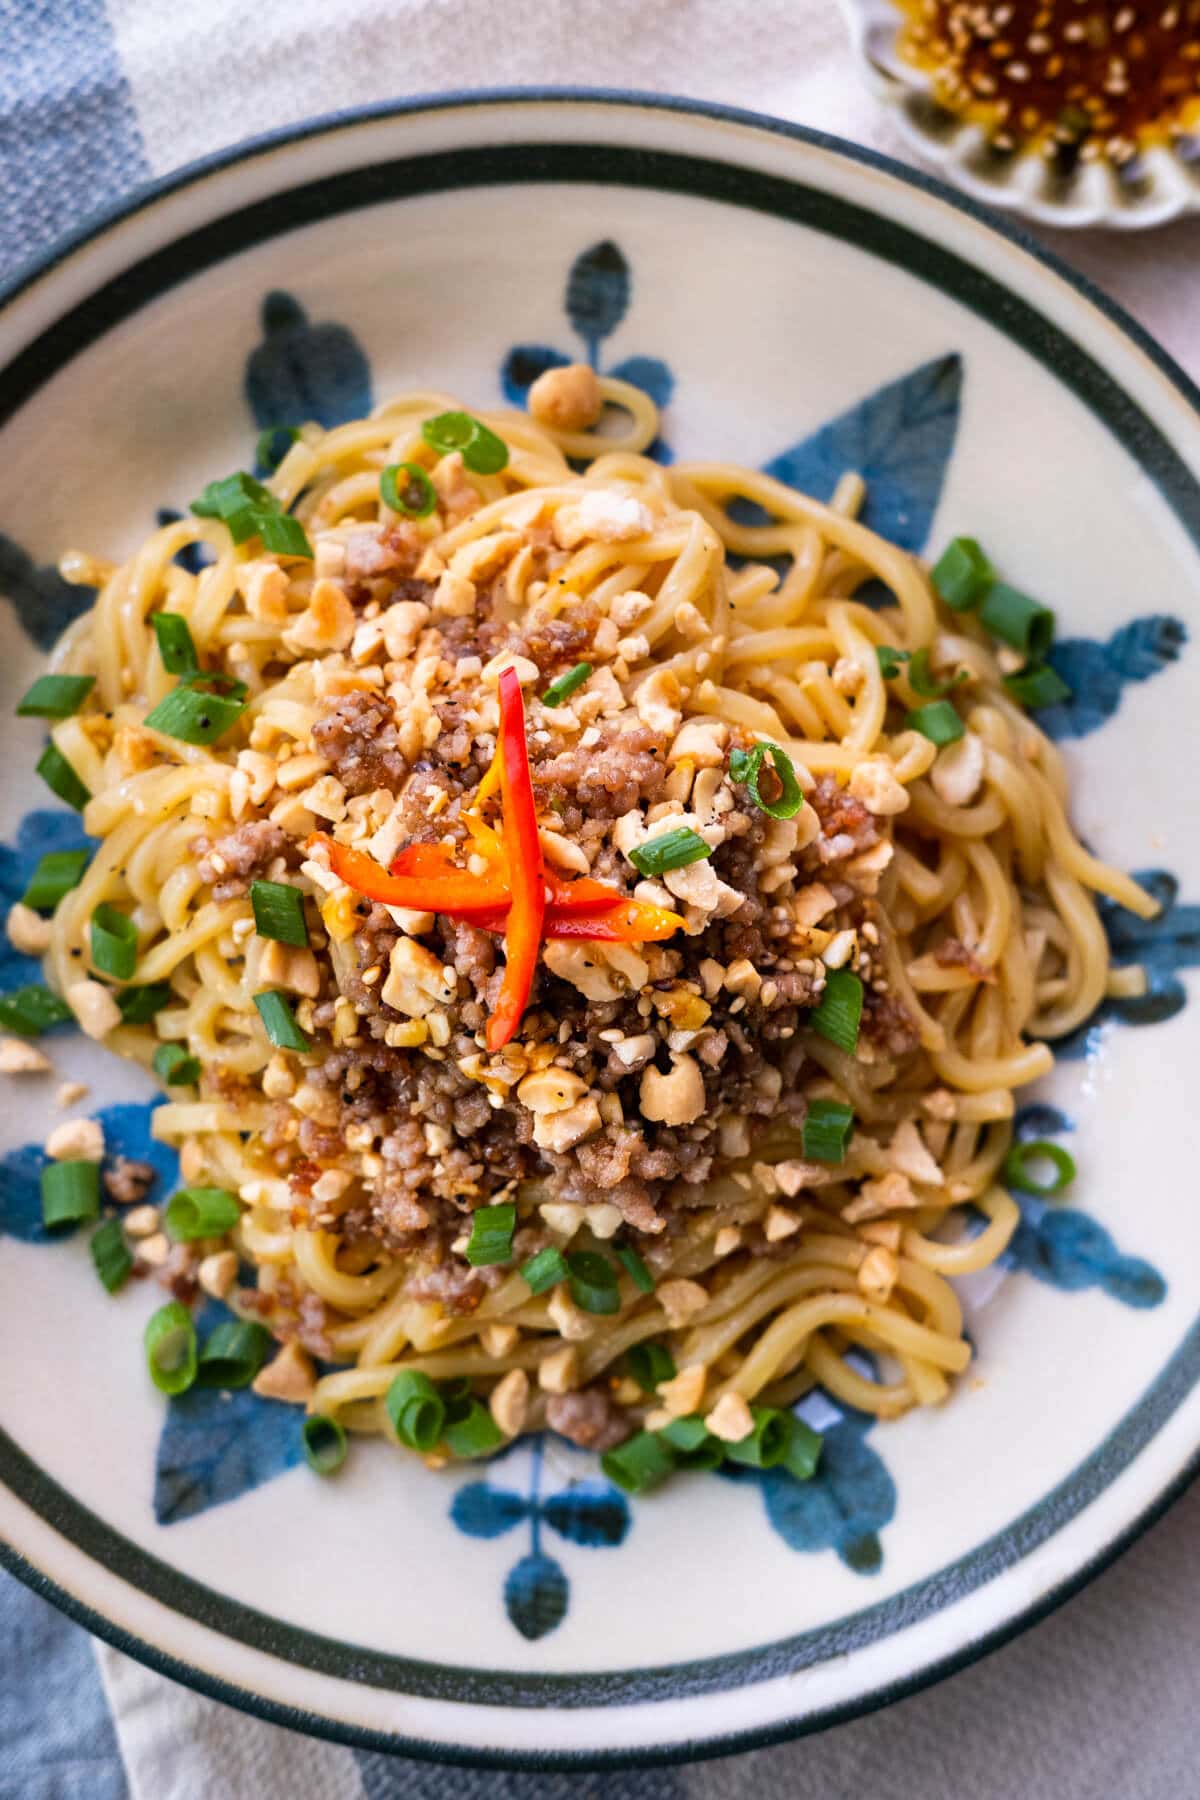 Sichuan Chinese Dan Dan noodles with ground meat.